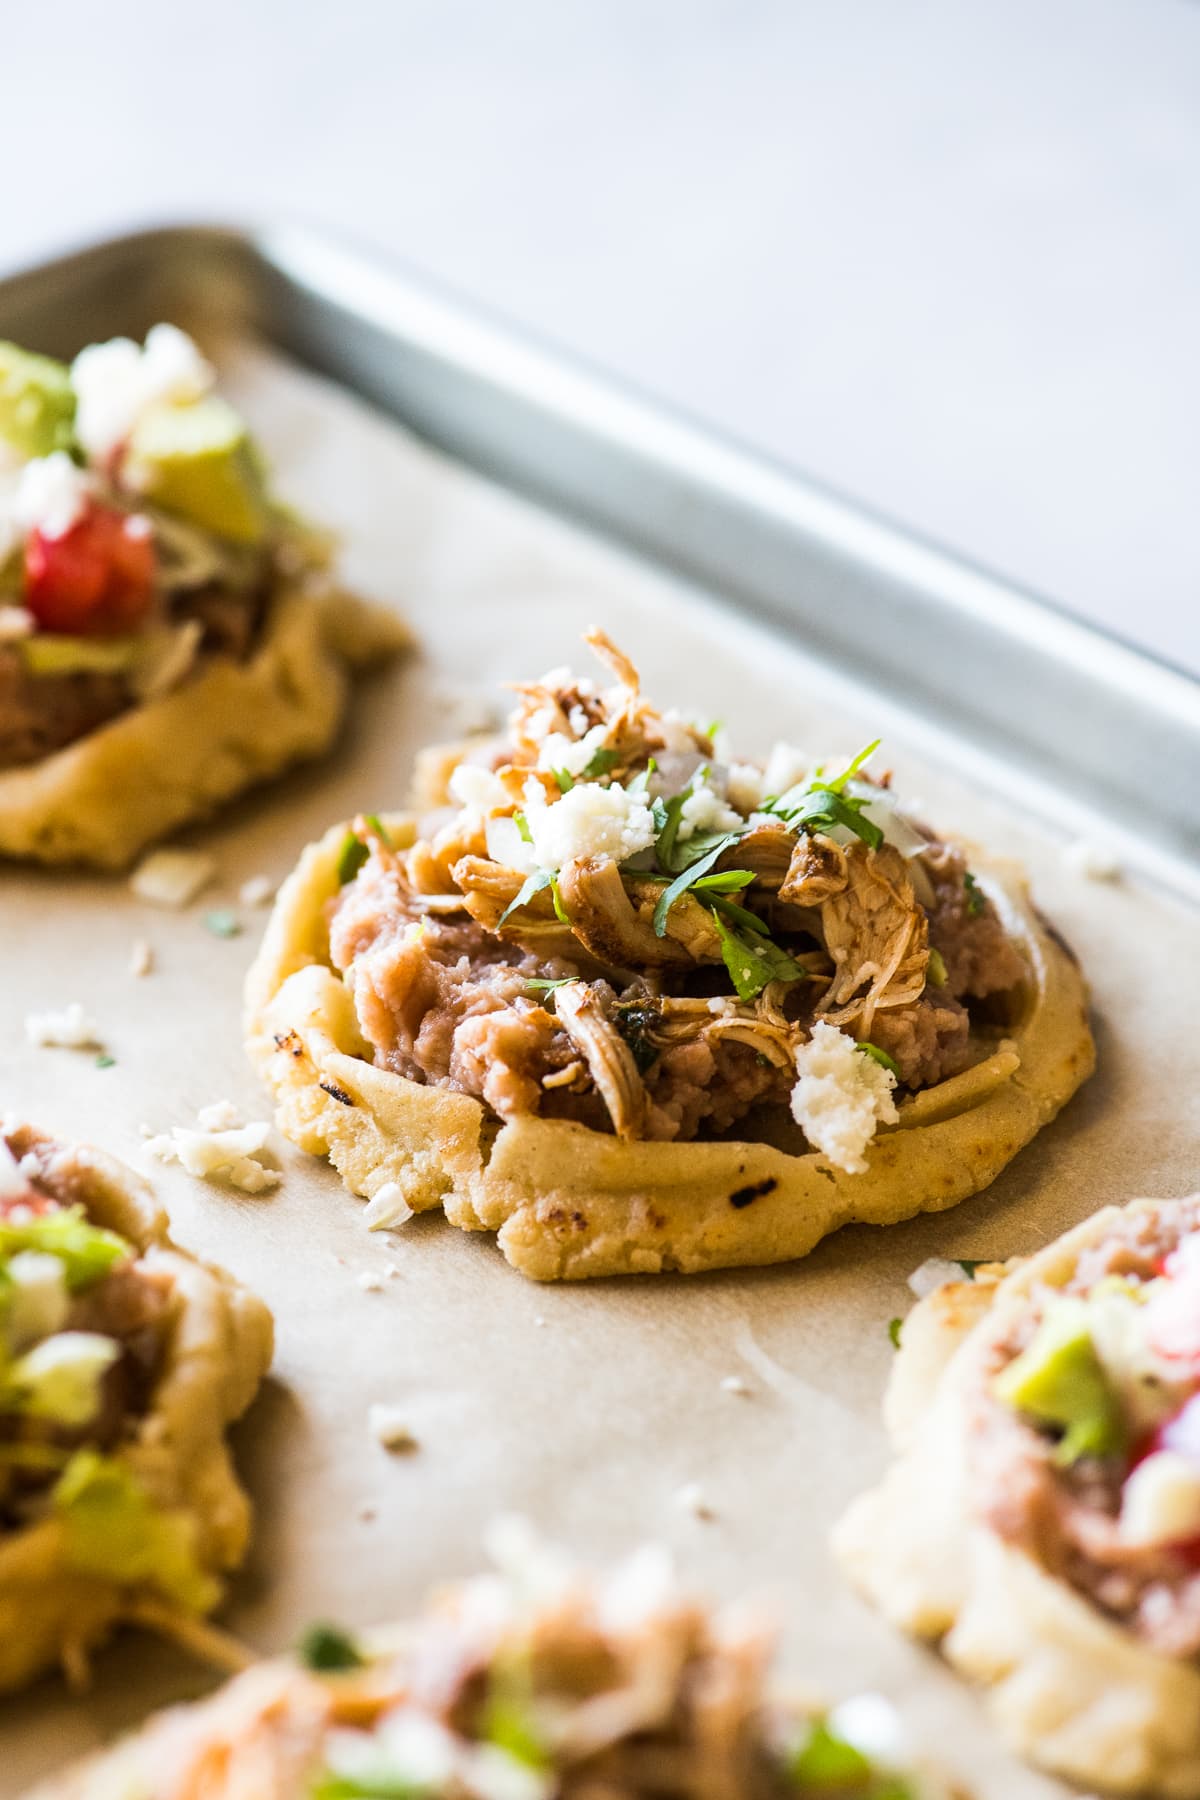 Sopes topped with shredded carnitas and queso fresco.